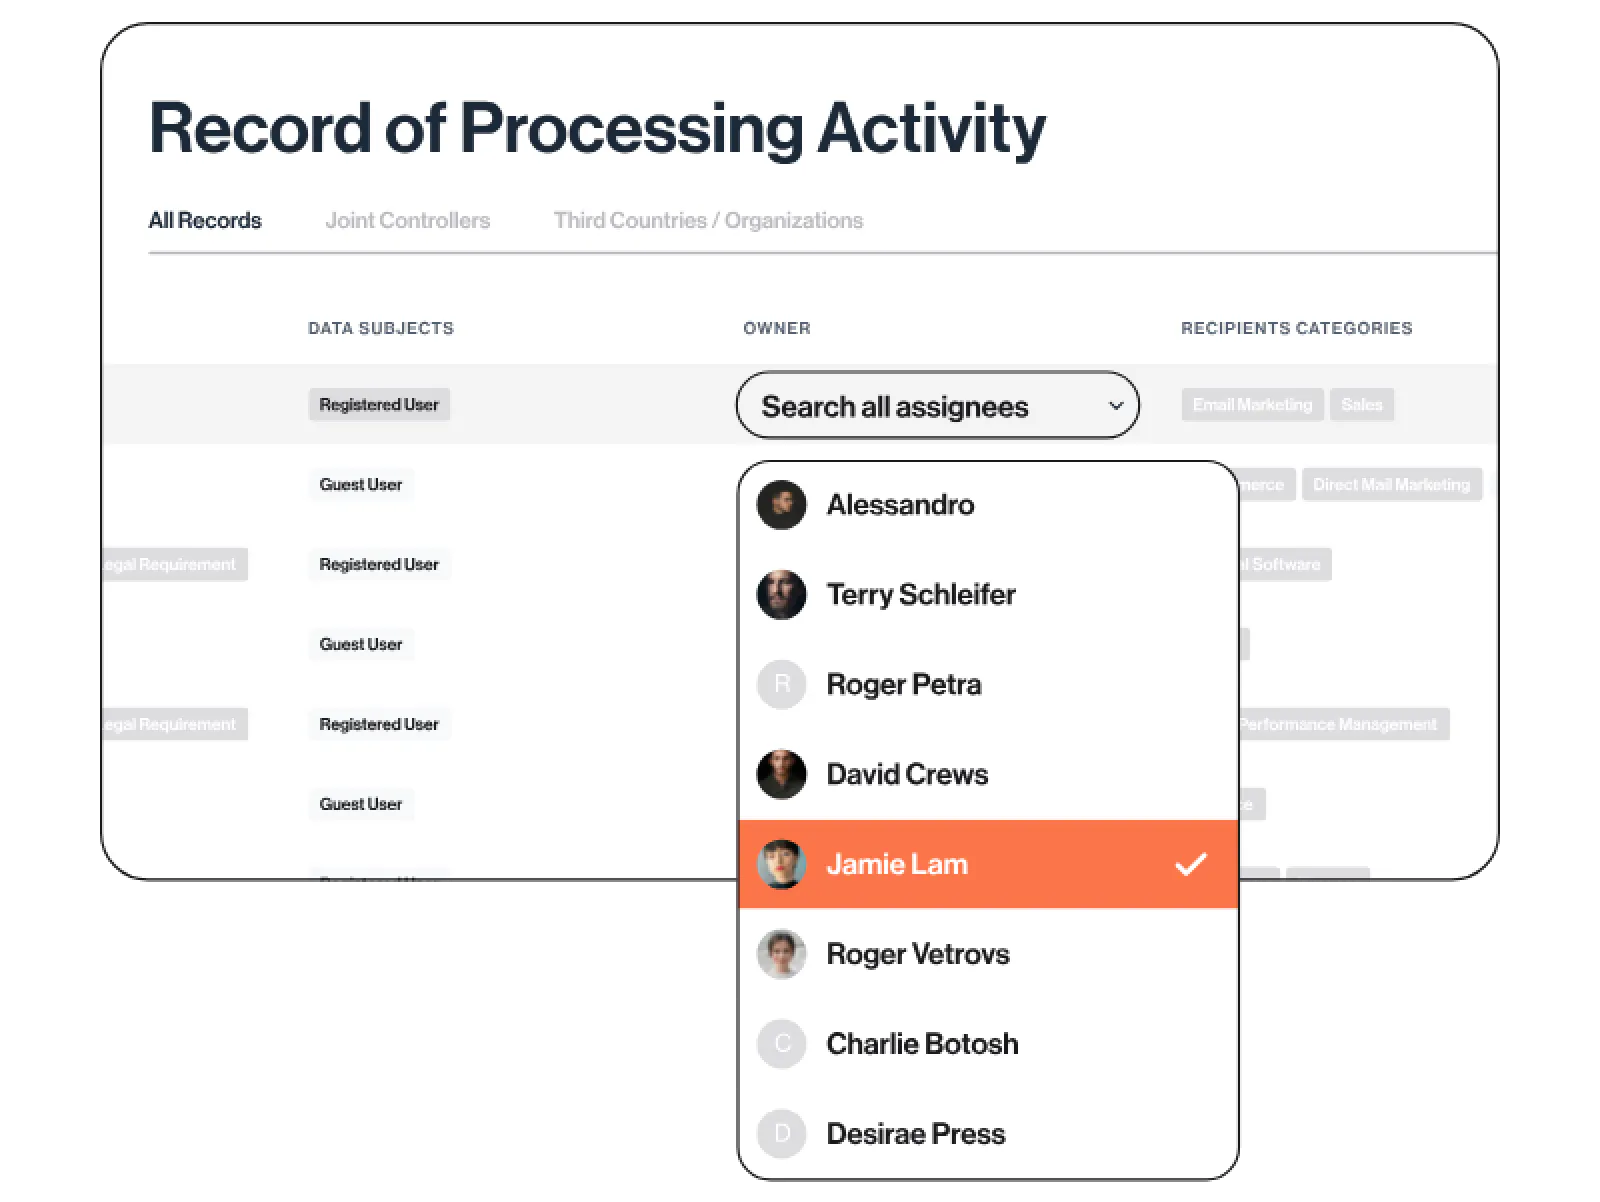 Record of Processing activity dashboard image